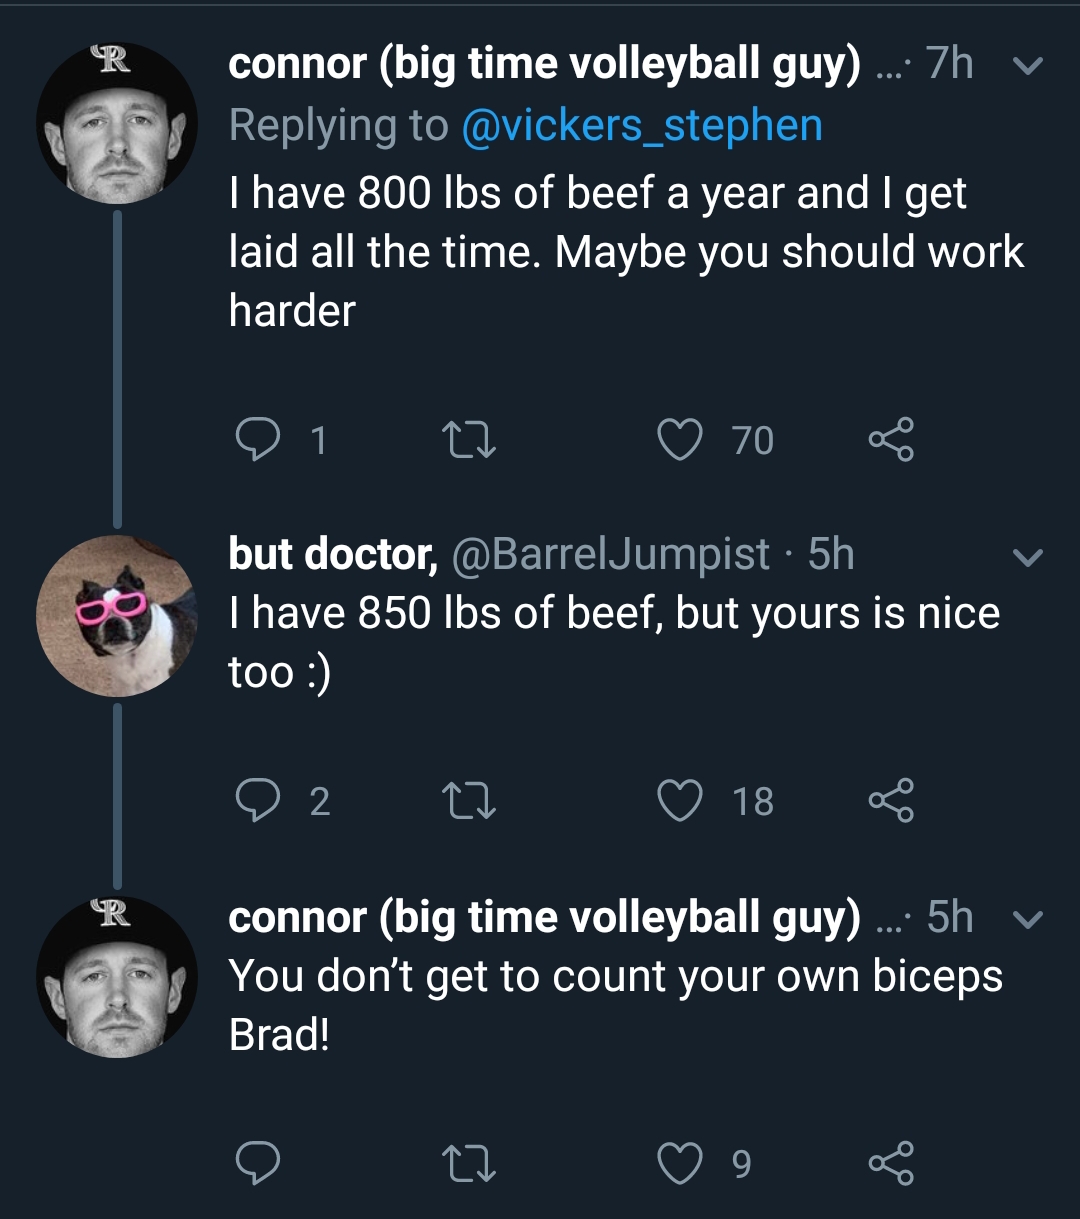 rant - screenshot - connor big time volleyball guy... 7h v I have 800 lbs of beef a year and I get laid all the time. Maybe you should work harder 01 22 70 g but doctor, 5h Thave 850 lbs of beef, but yours is nice too 02 27 18 8 connor big time volleyball